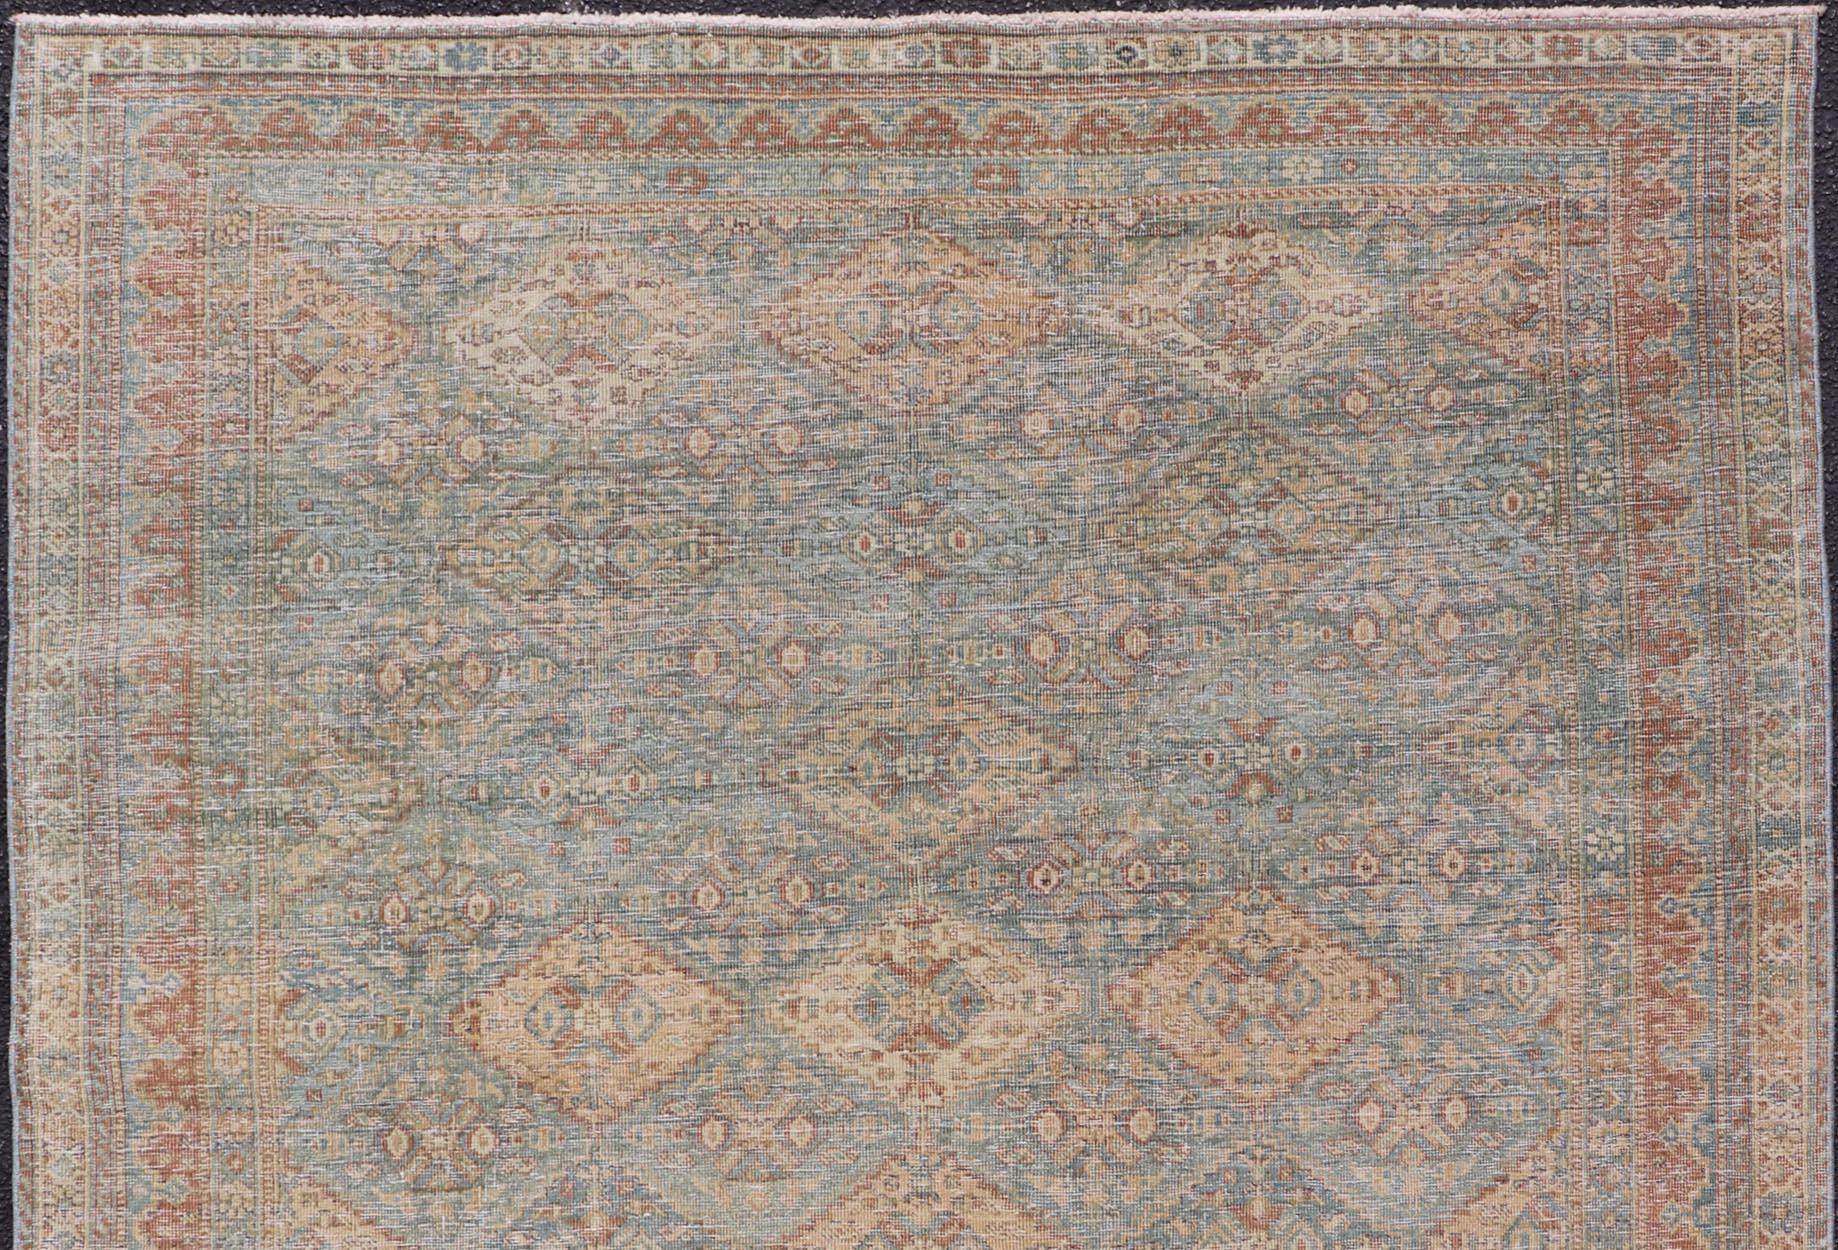 Antique Persian Tabriz Rug in Wool with Diamond Design in Blue, Apricot & Gray In Good Condition For Sale In Atlanta, GA